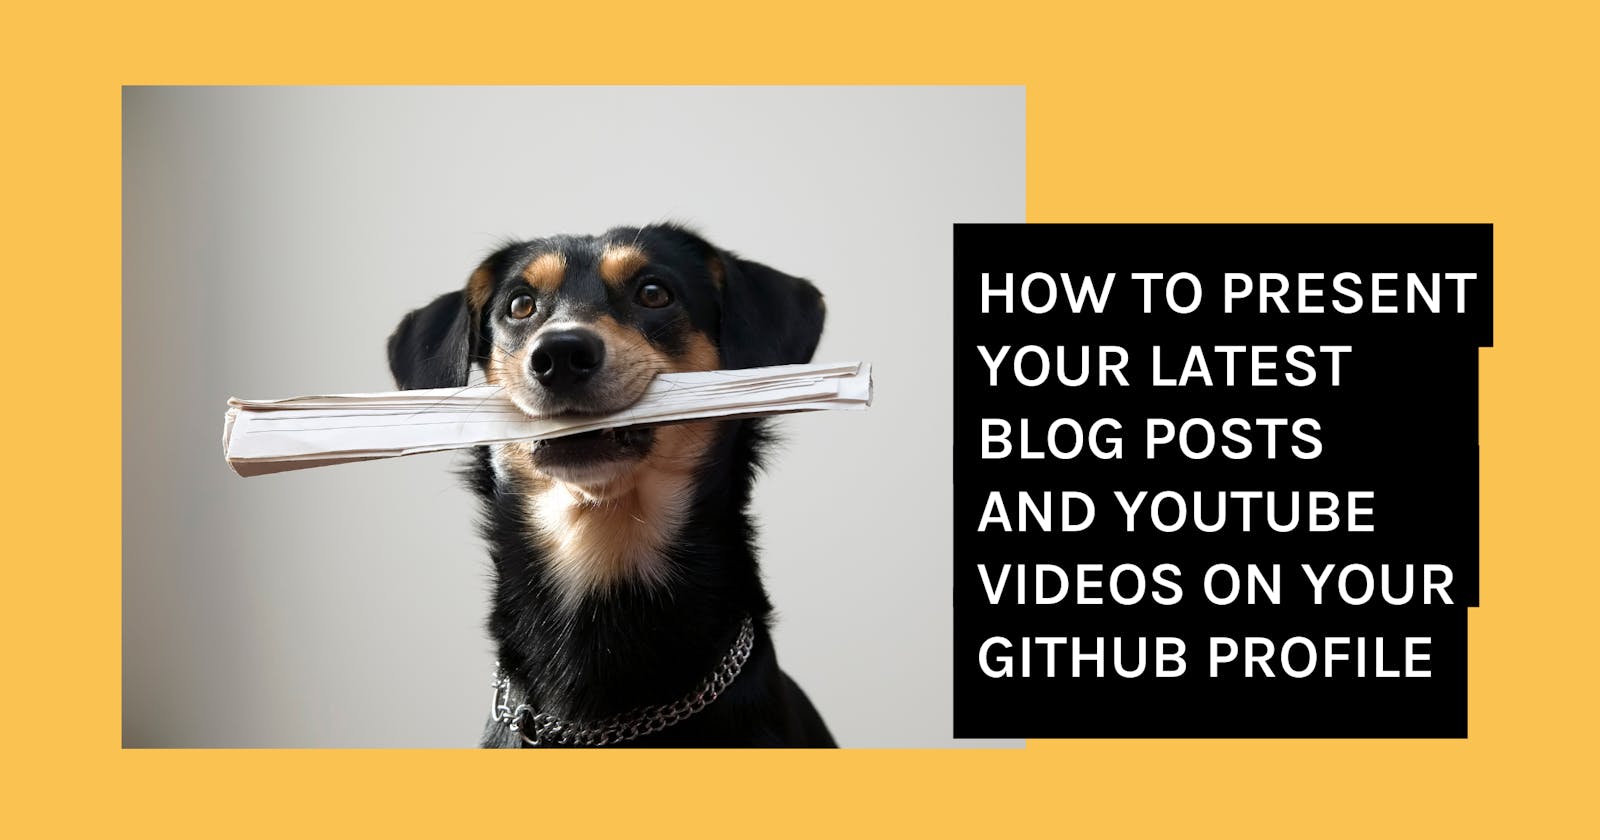 How to present your latest blog posts and YouTube videos on your GitHub profile